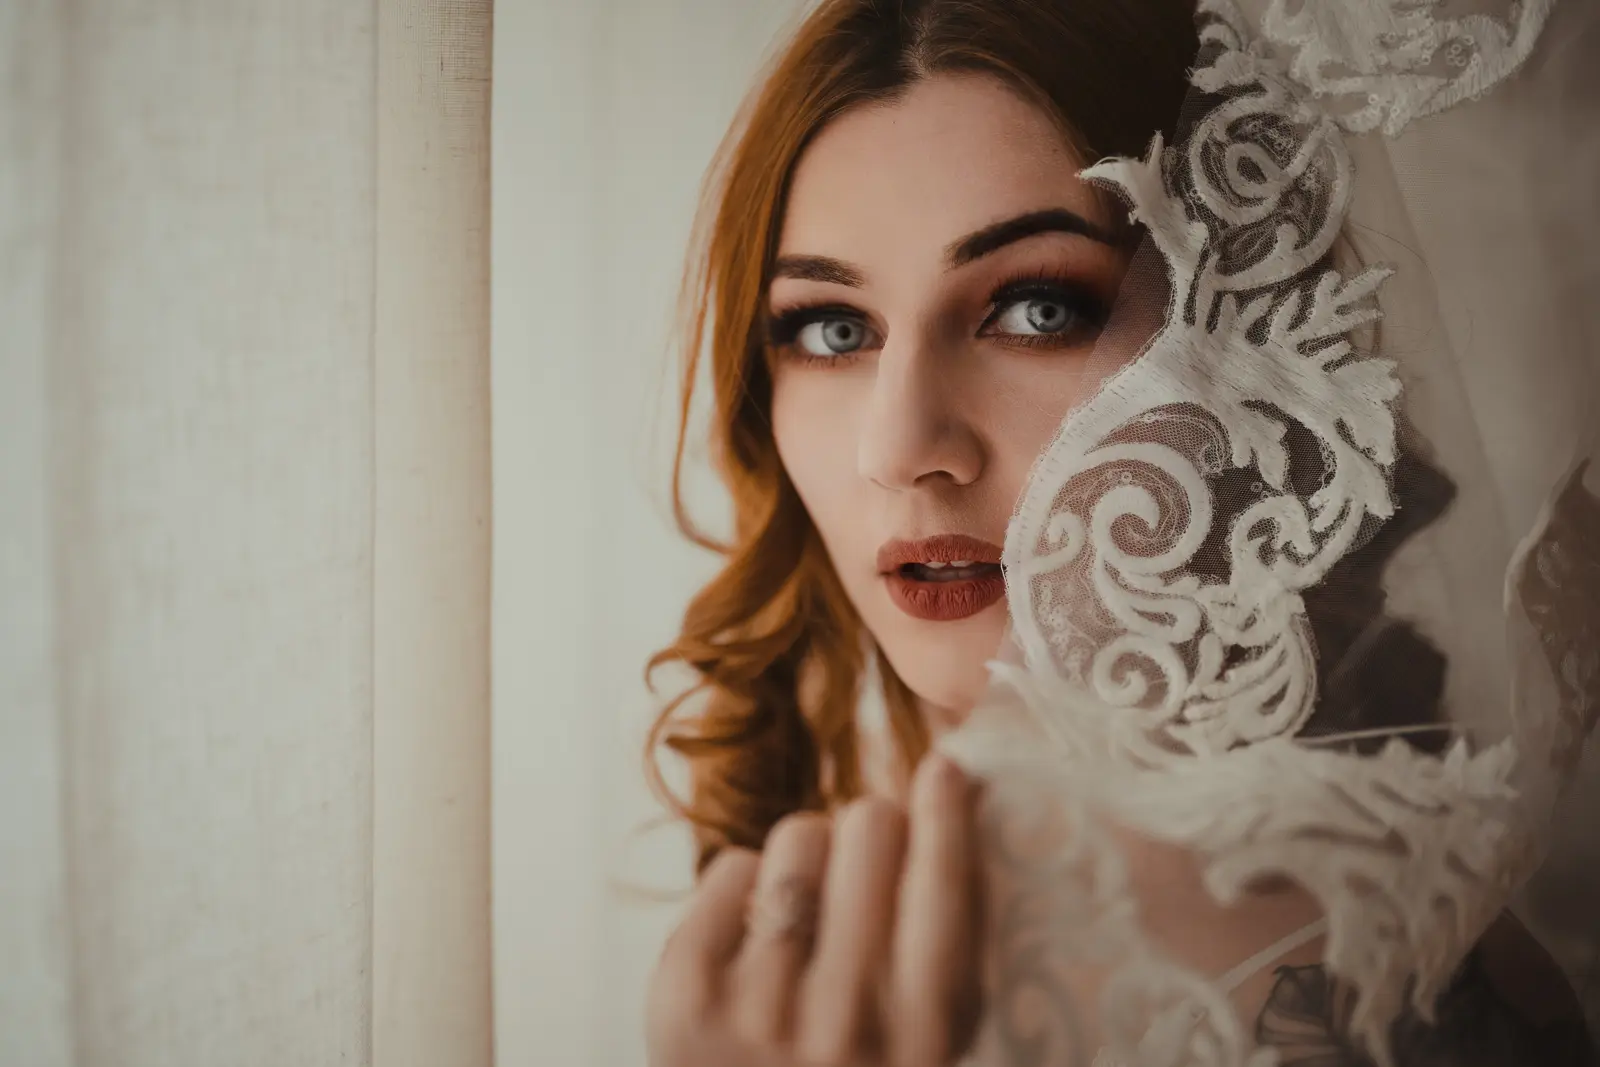 A bride with blue eyes looking at the boudoir photographer with her wedding dress next to her. The photo has a moody edit with rich tones